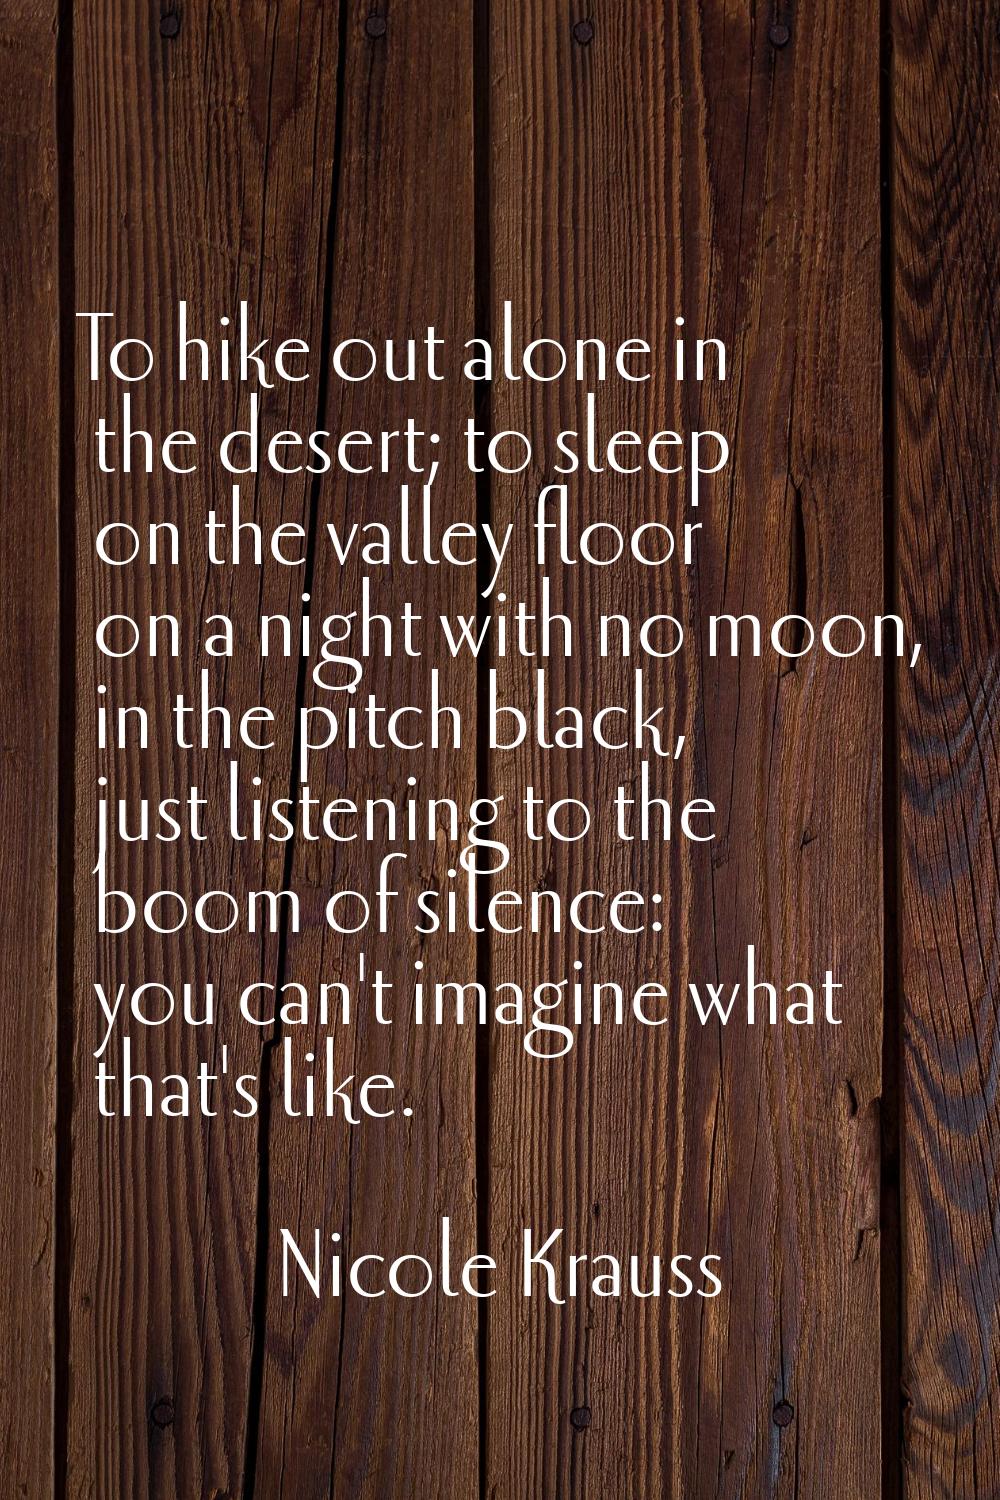 To hike out alone in the desert; to sleep on the valley floor on a night with no moon, in the pitch